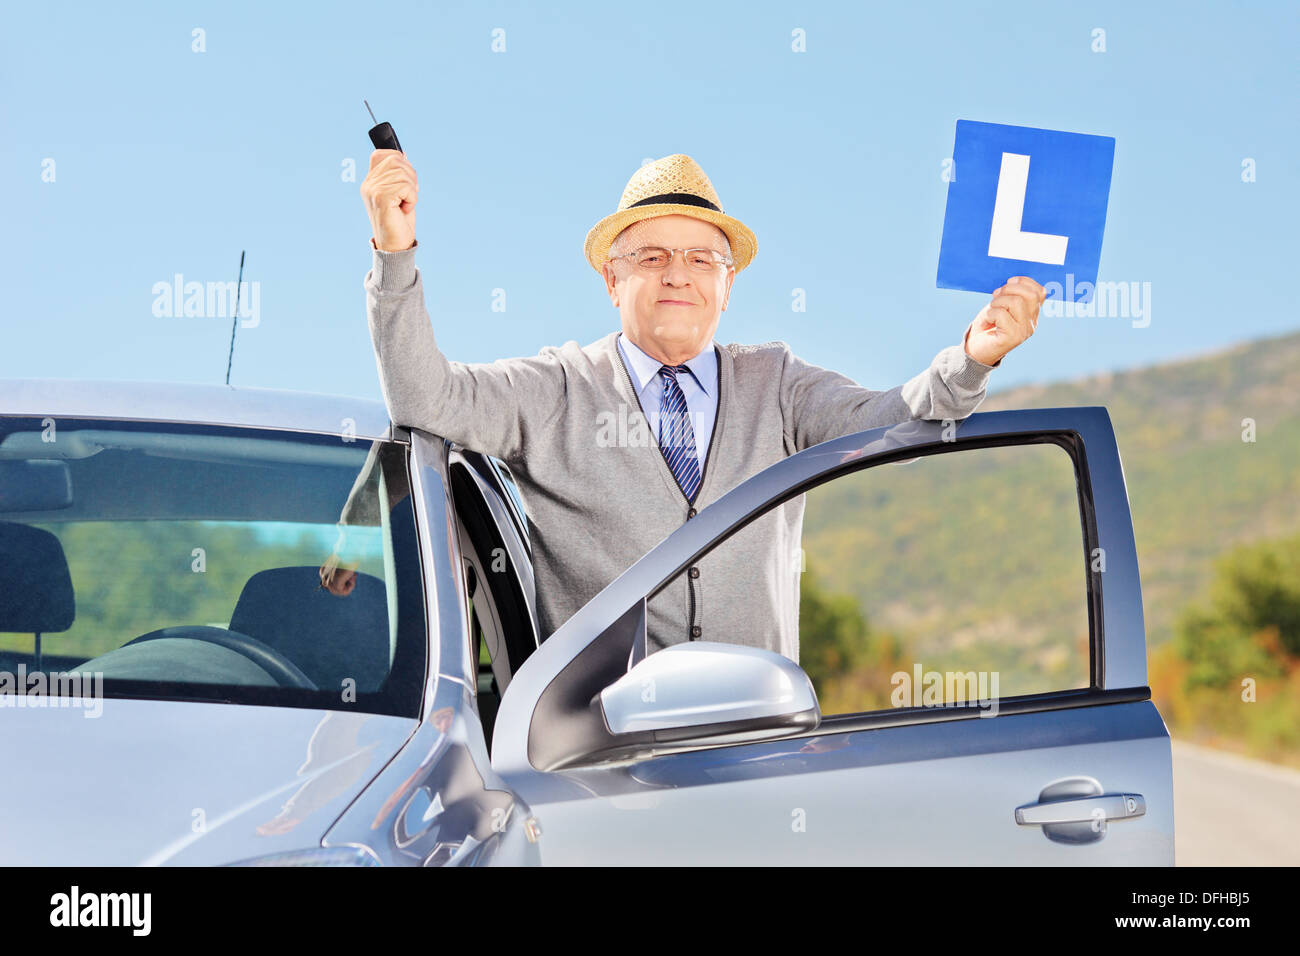 Smiling senior man posing next to his car holding a L sign and car key after having his driver's license Stock Photo